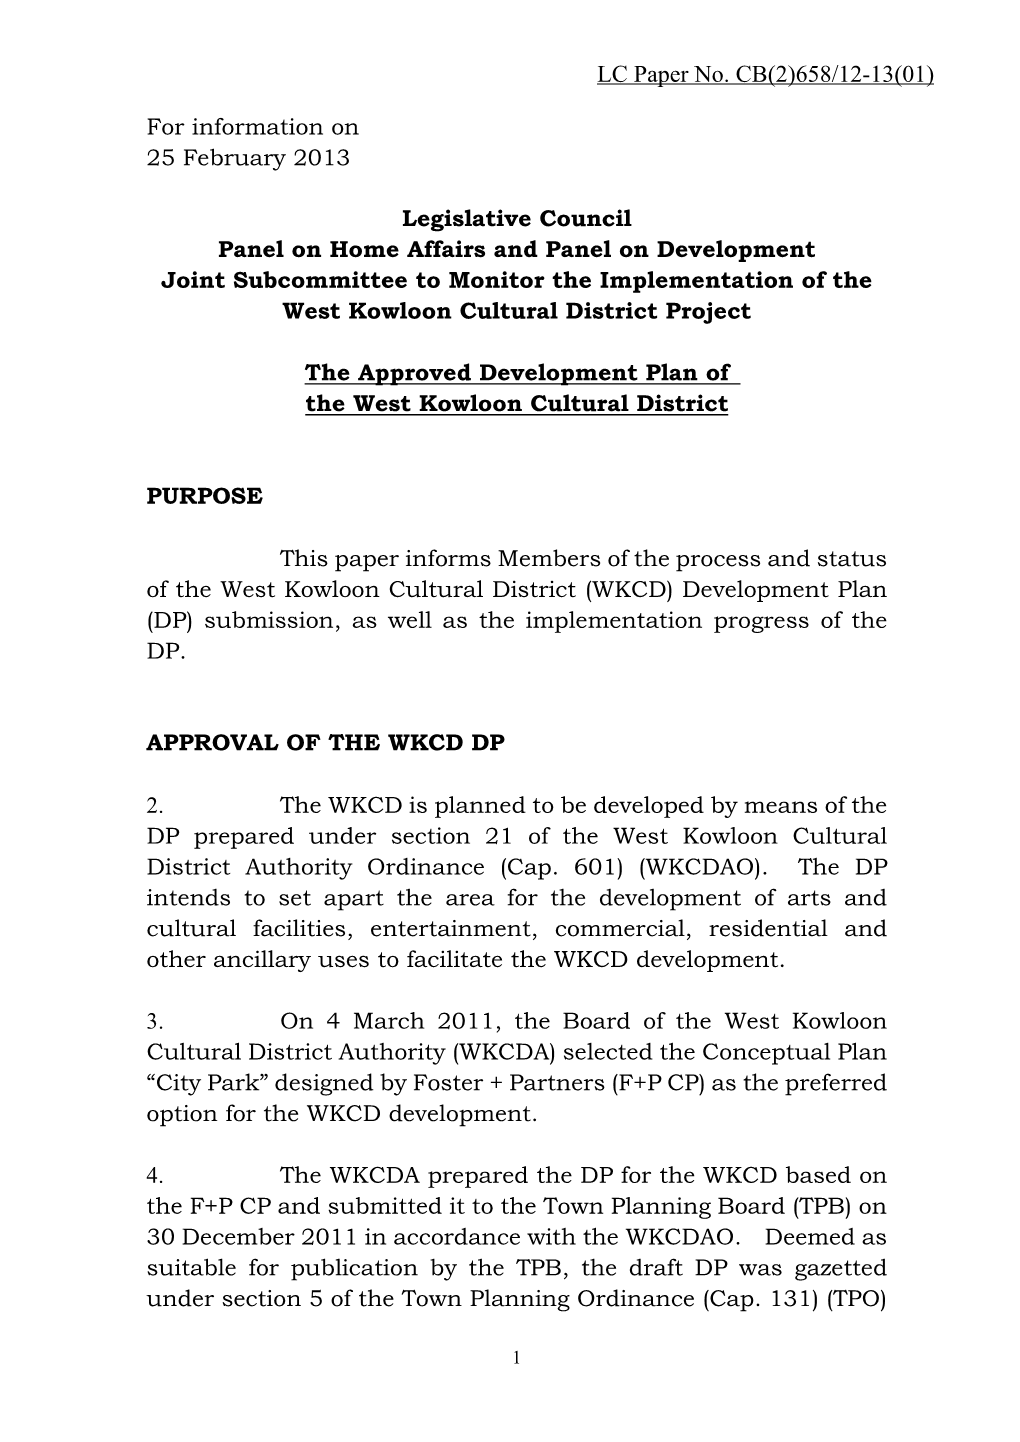 Administration's Paper on the Approved Development Plan of The